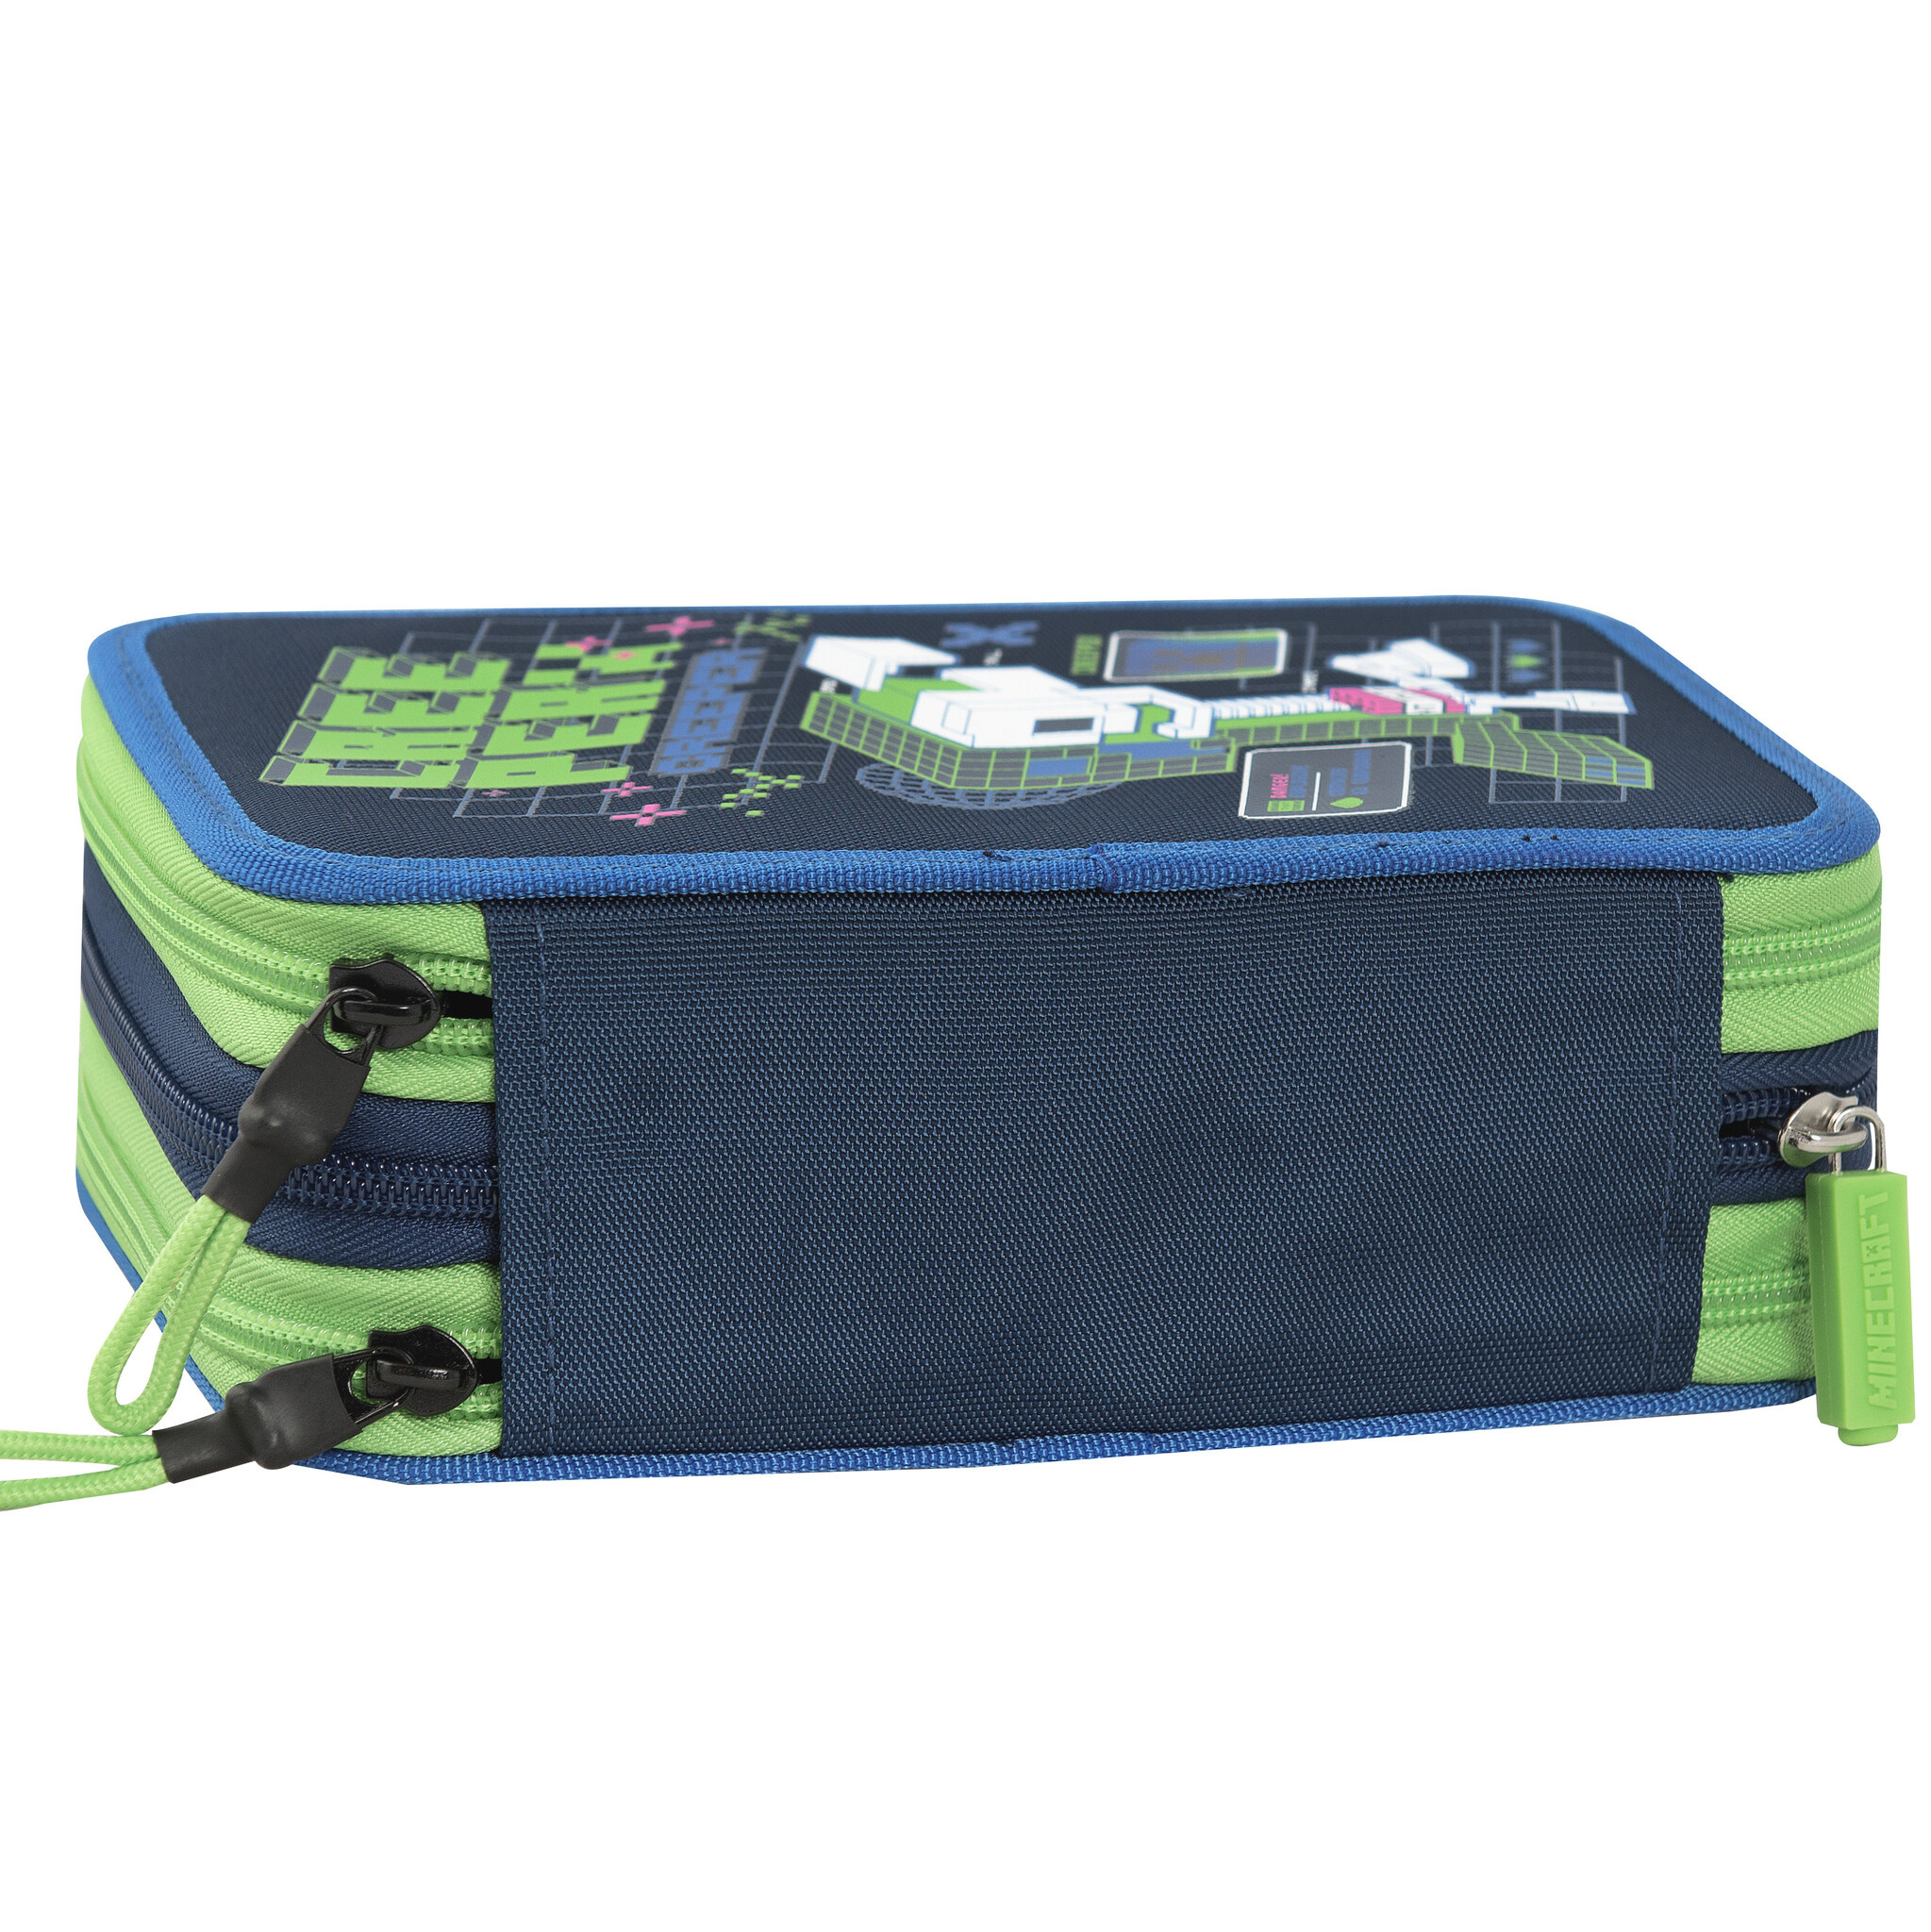 Minecraft Filled Pencil Case Creeper 3 zippers - 20 x 13 x 7 cm - Polyester